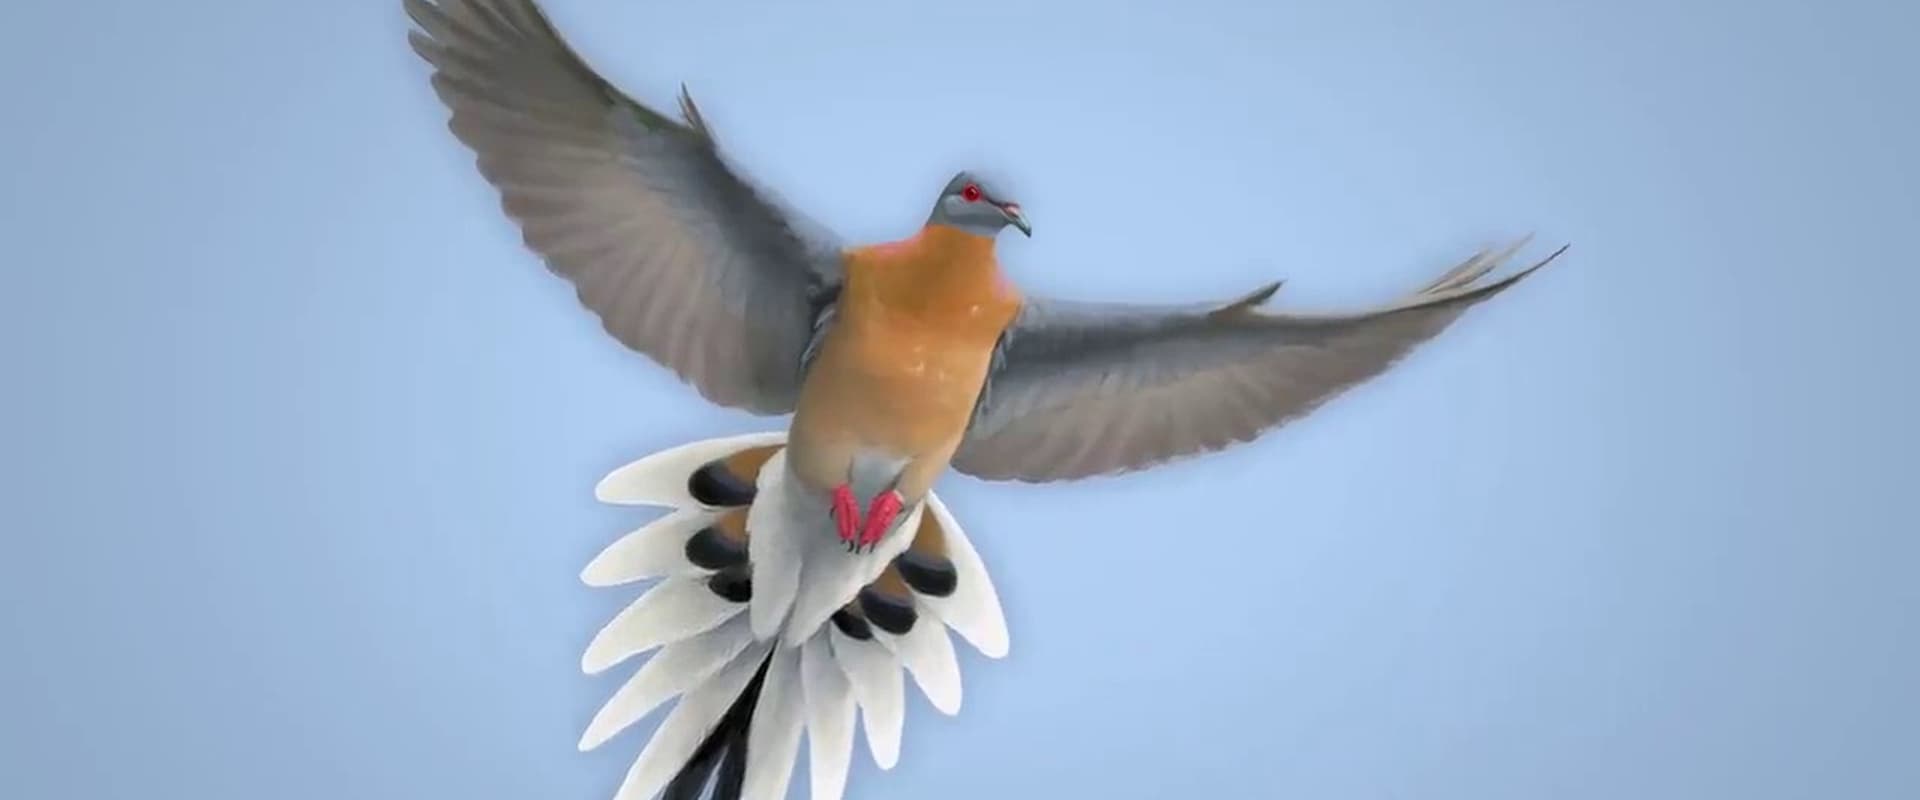 From Billions to None: The Passenger Pigeon's Flight to Extinction